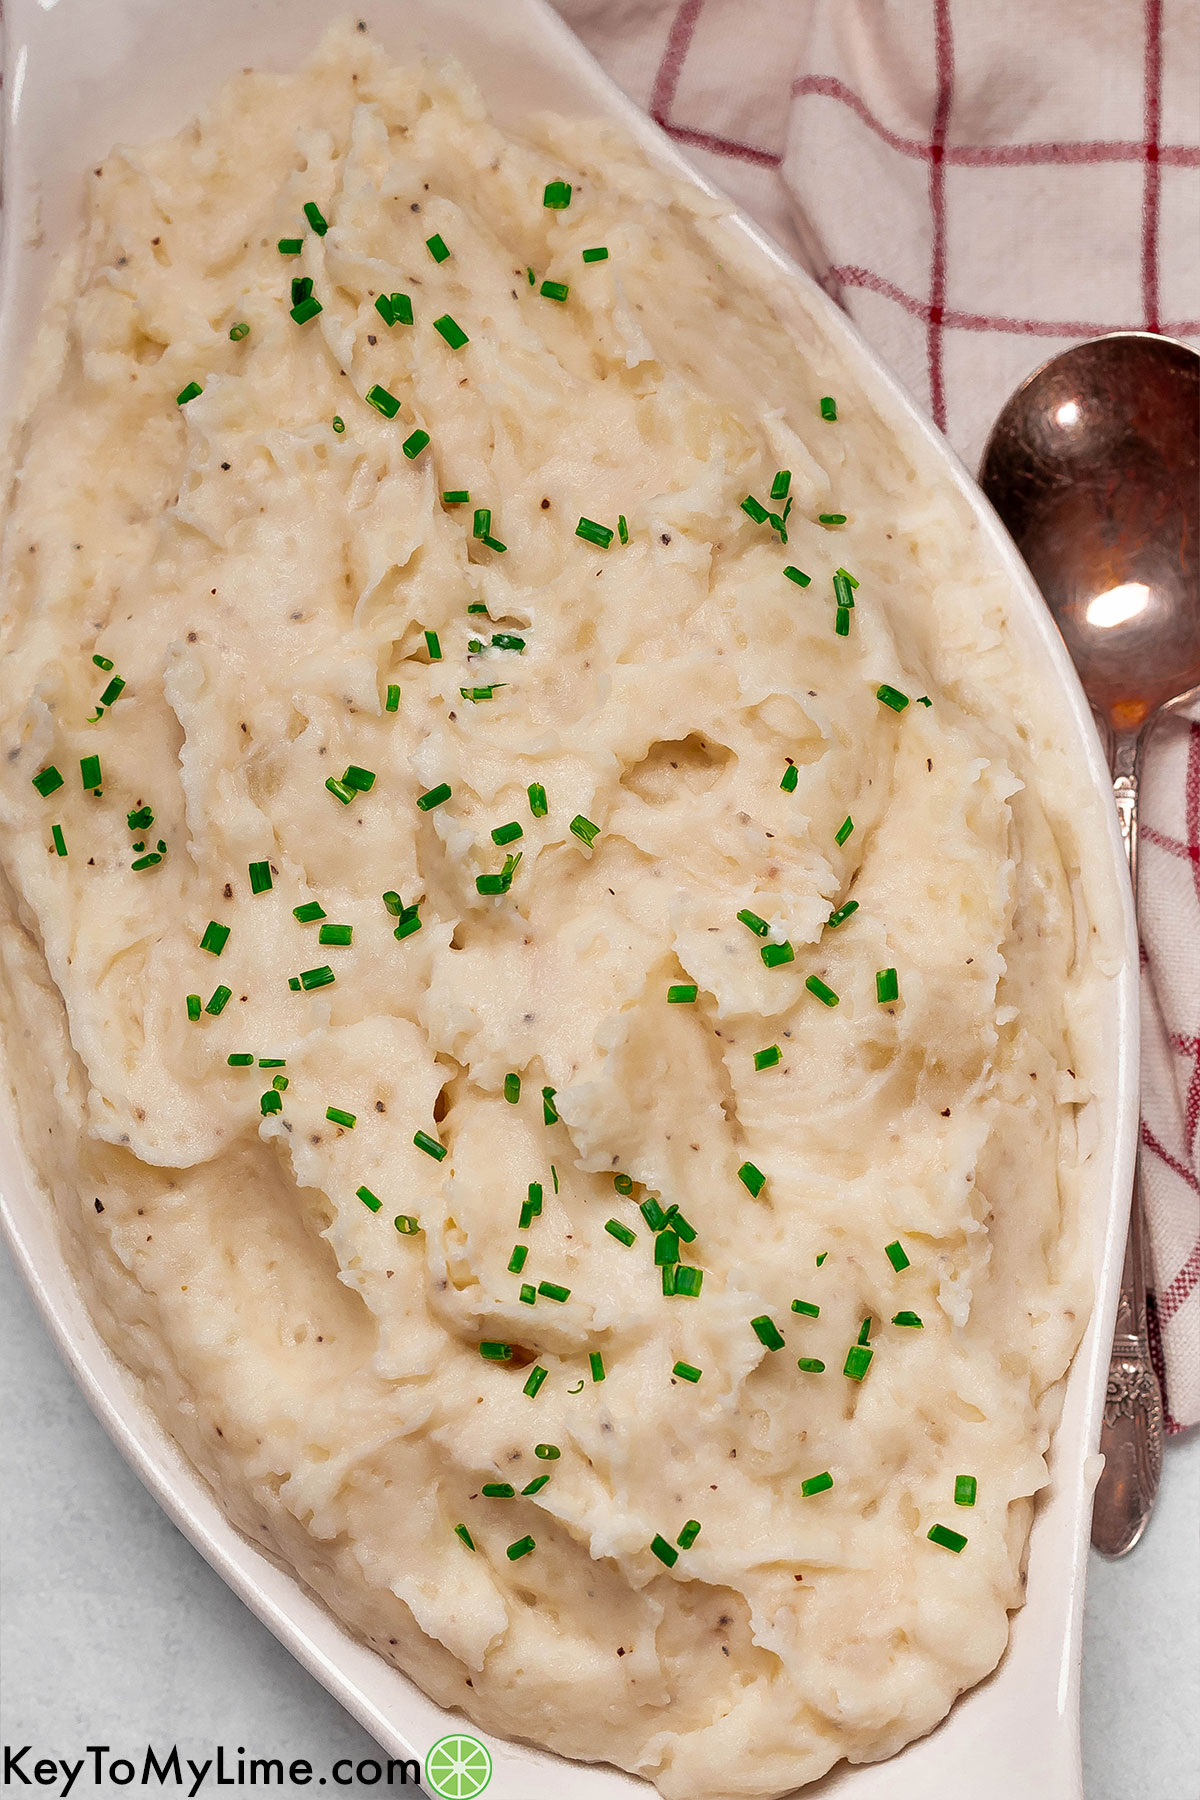 An overhead image of a large serving dish filled with mashed potatoes with swirls throughout.